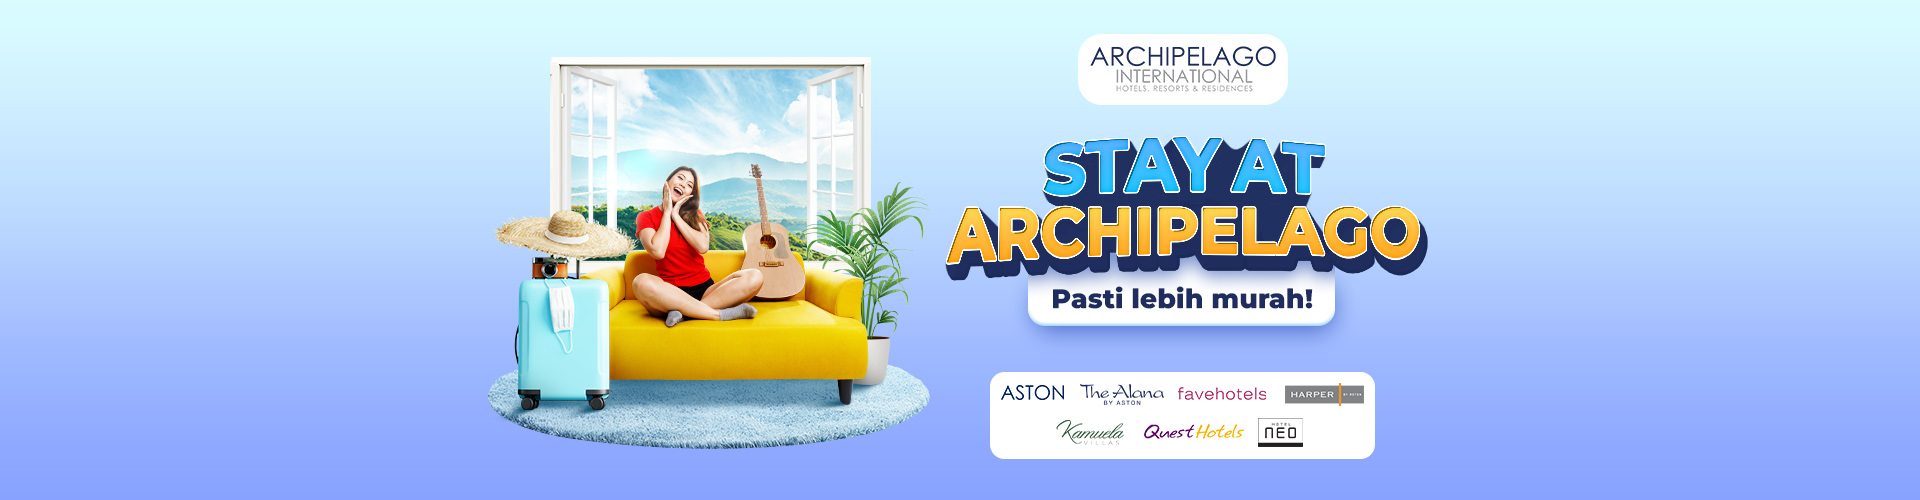 Stay at Archipelago